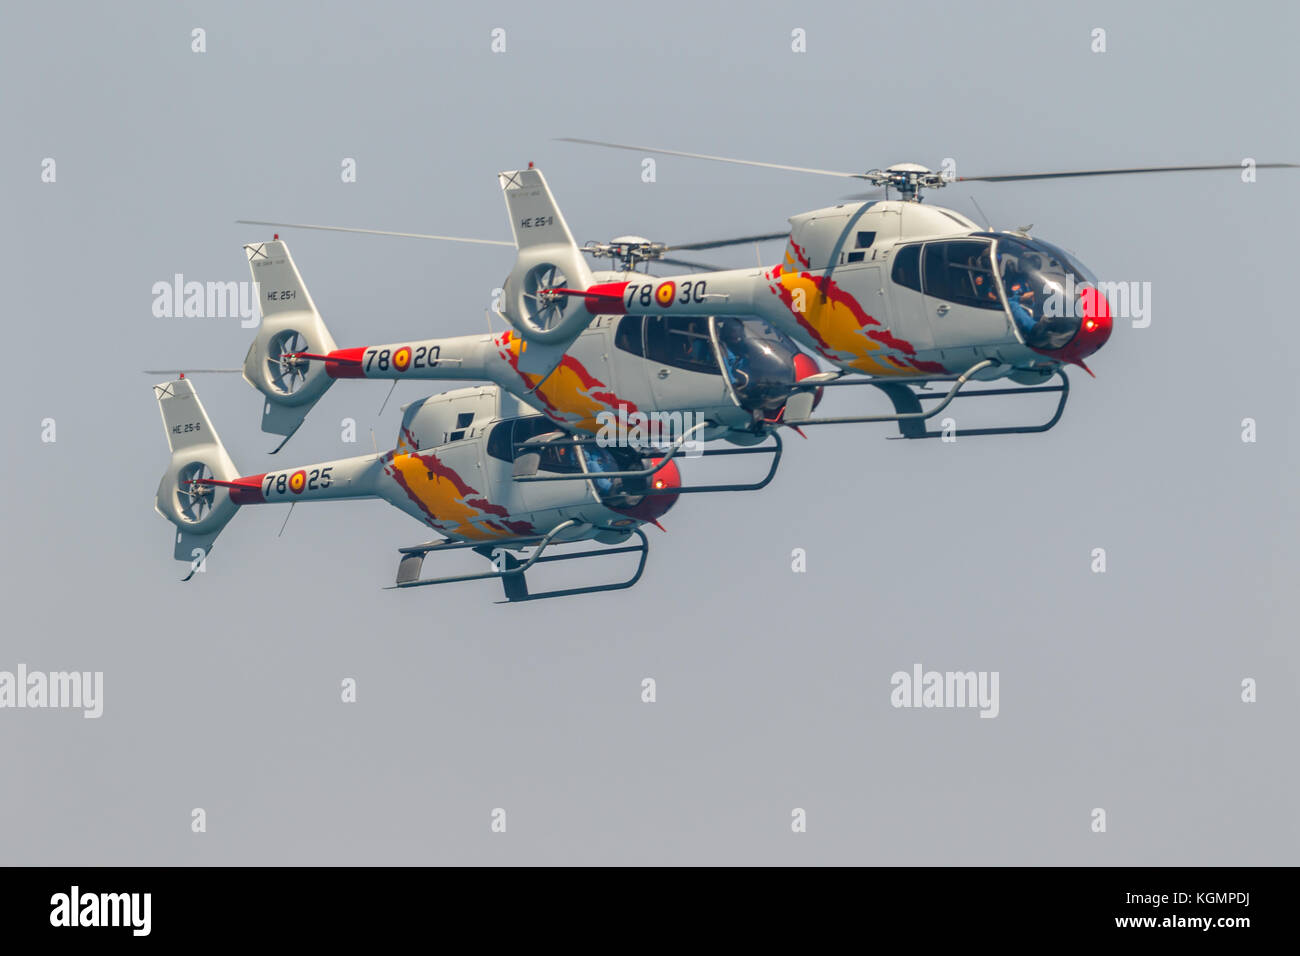 TORRE DEL MAR, MALAGA, SPAIN-JUL 28: Patrulla Aspa, Helicopter Eurocopter EC-120 Colibri taking part in a exhibition on the 2nd airshow of Torre del M Stock Photo